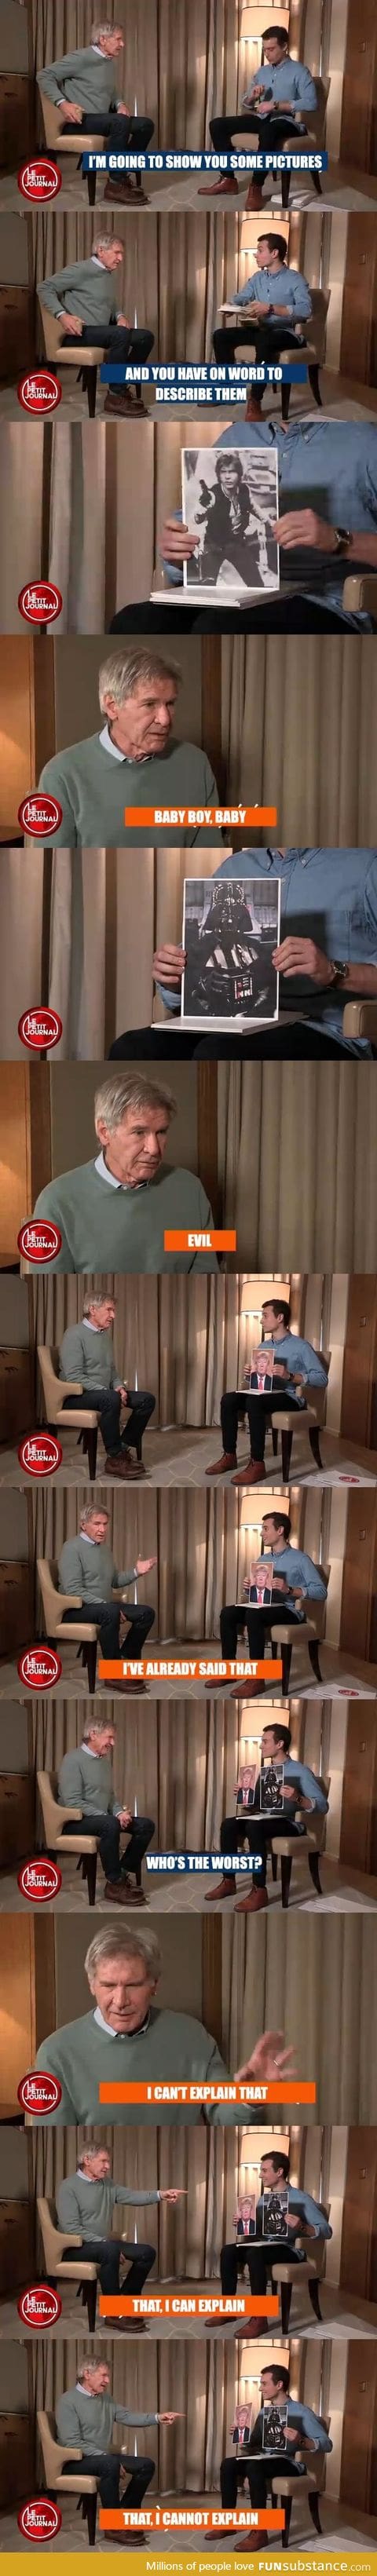 Harrison Ford on French television